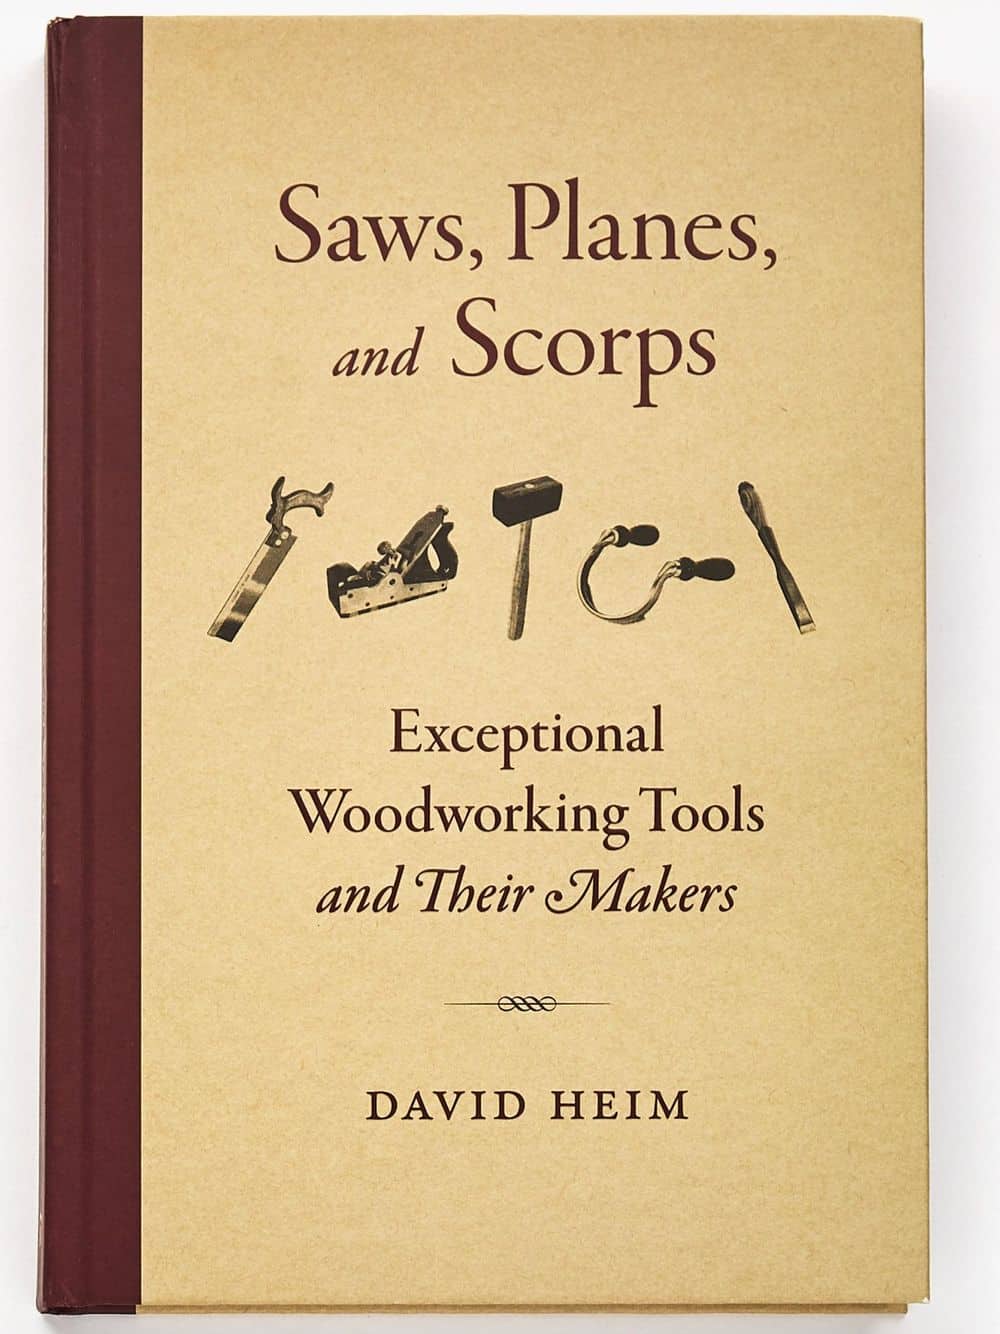 >Saws, Planes, and Scorps: Exceptional Woodworking Tools and Their Makers